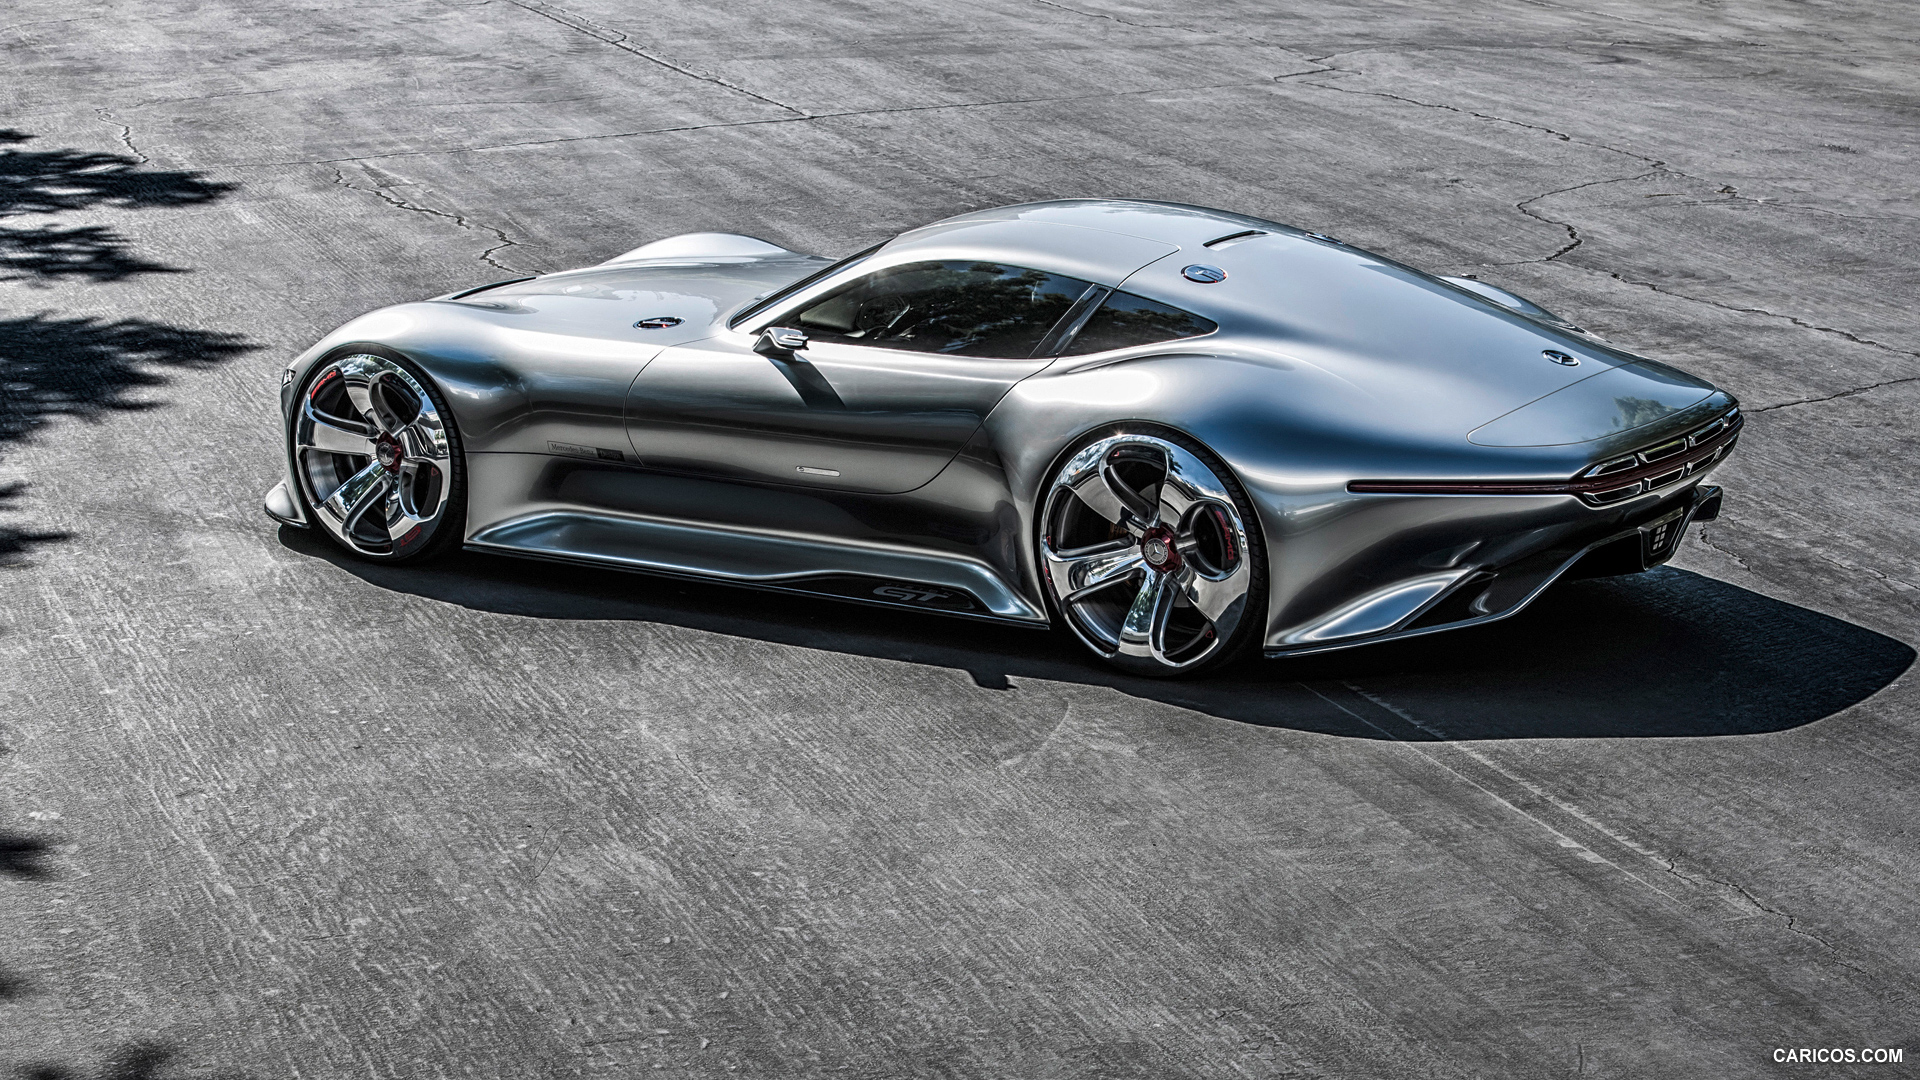 Mercedes-Benz AMG Vision Gran Turismo Concept (2013)  - Side, #6 of 25